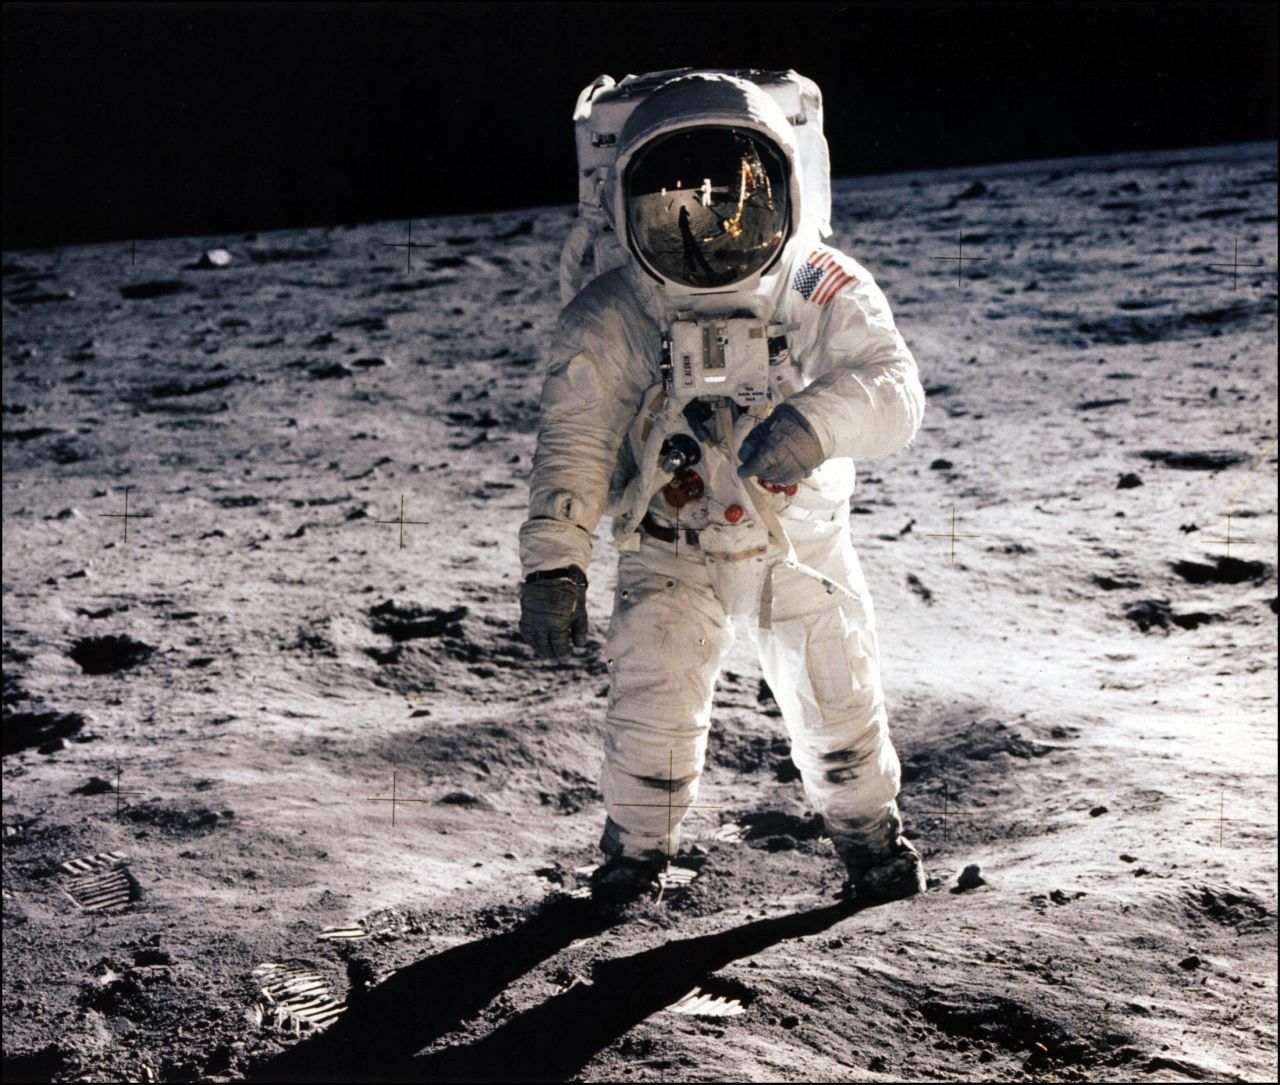 Apollo 11 astronaut Edwin E. "Buzz" Aldrin Jr. walks on the lunar surface on July 20, 1969. He and mission commander Neil Armstrong became the first humans to walk on the moon. Their mission was considered an American victory in the Cold War and subsequent space race, meeting President Kennedy's goal, voiced in 1961, of "landing a man on the moon and returning him safely to the earth" before the end of the decade.